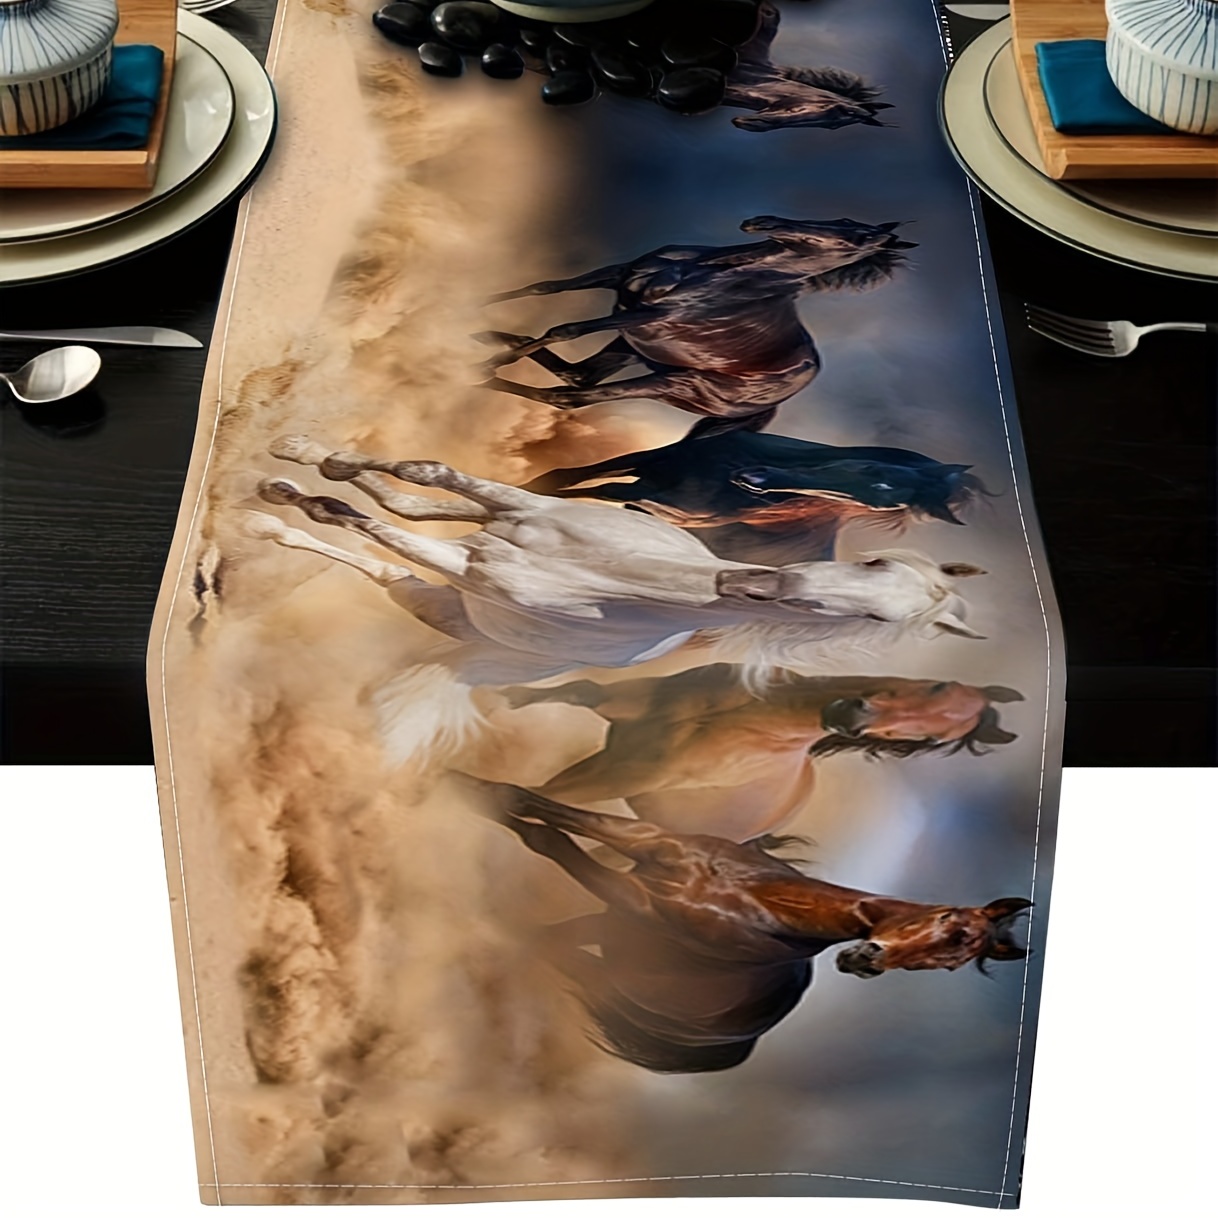 

1pc Table Runner Non-slip Rectangle Running Horses Printed Pattern For Dining Room Kitchen Living Room Outdoor Holiday And Party Table Decor 13x72 Inch